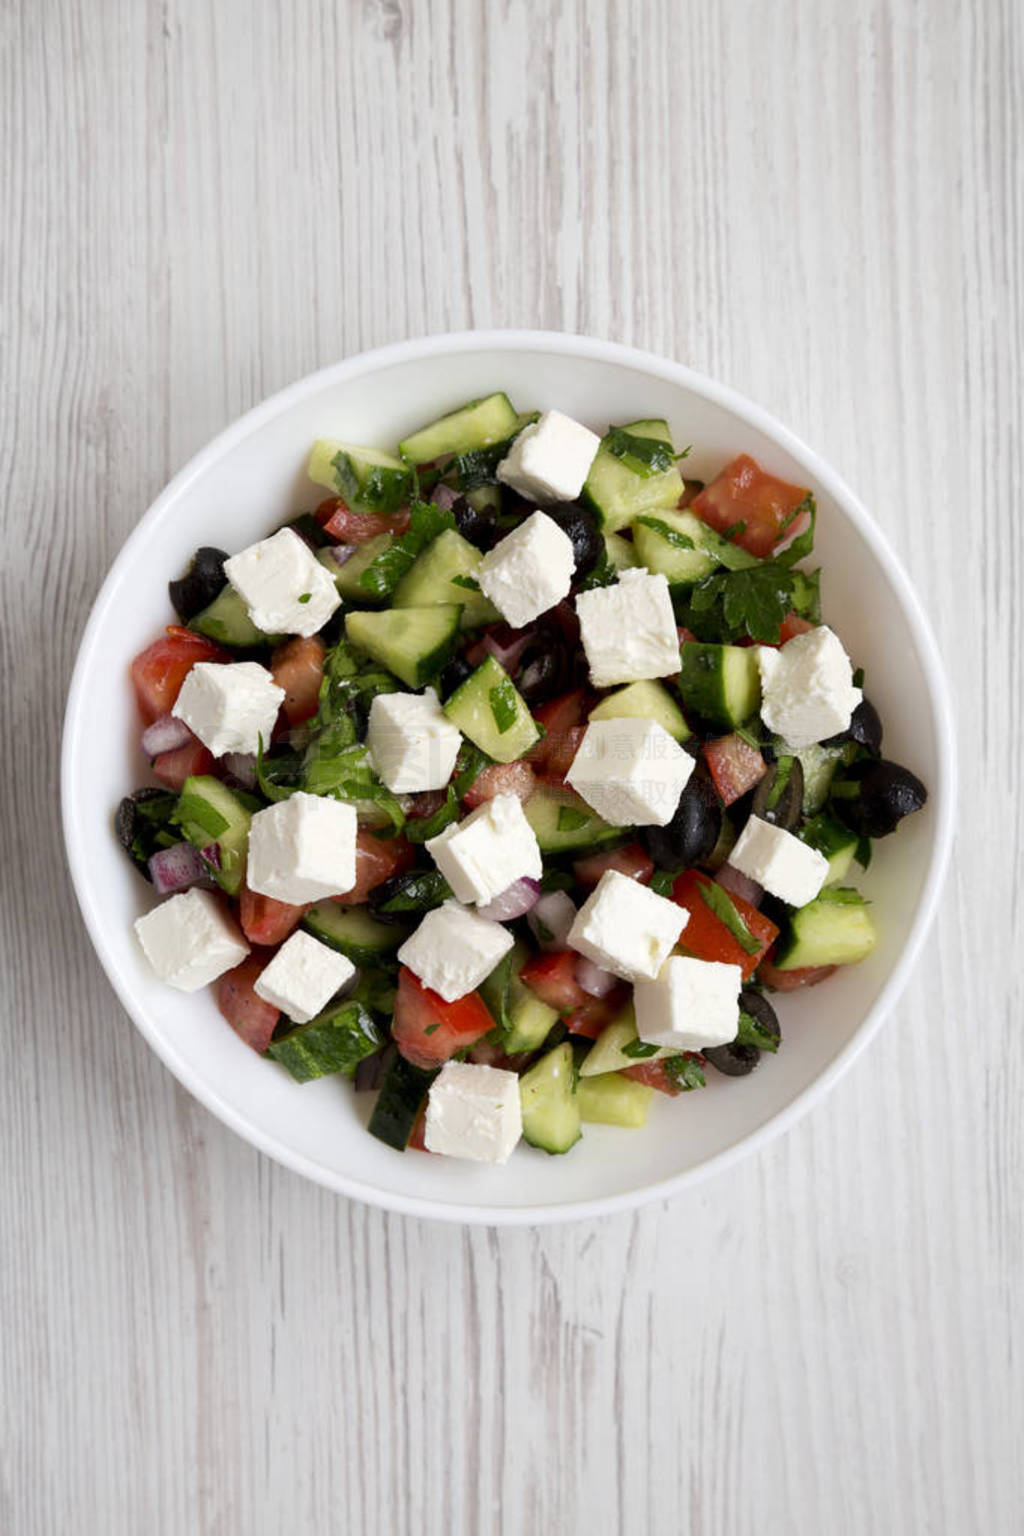 Homemade Shepherd's salad with cucumbers, feta and parsley in a